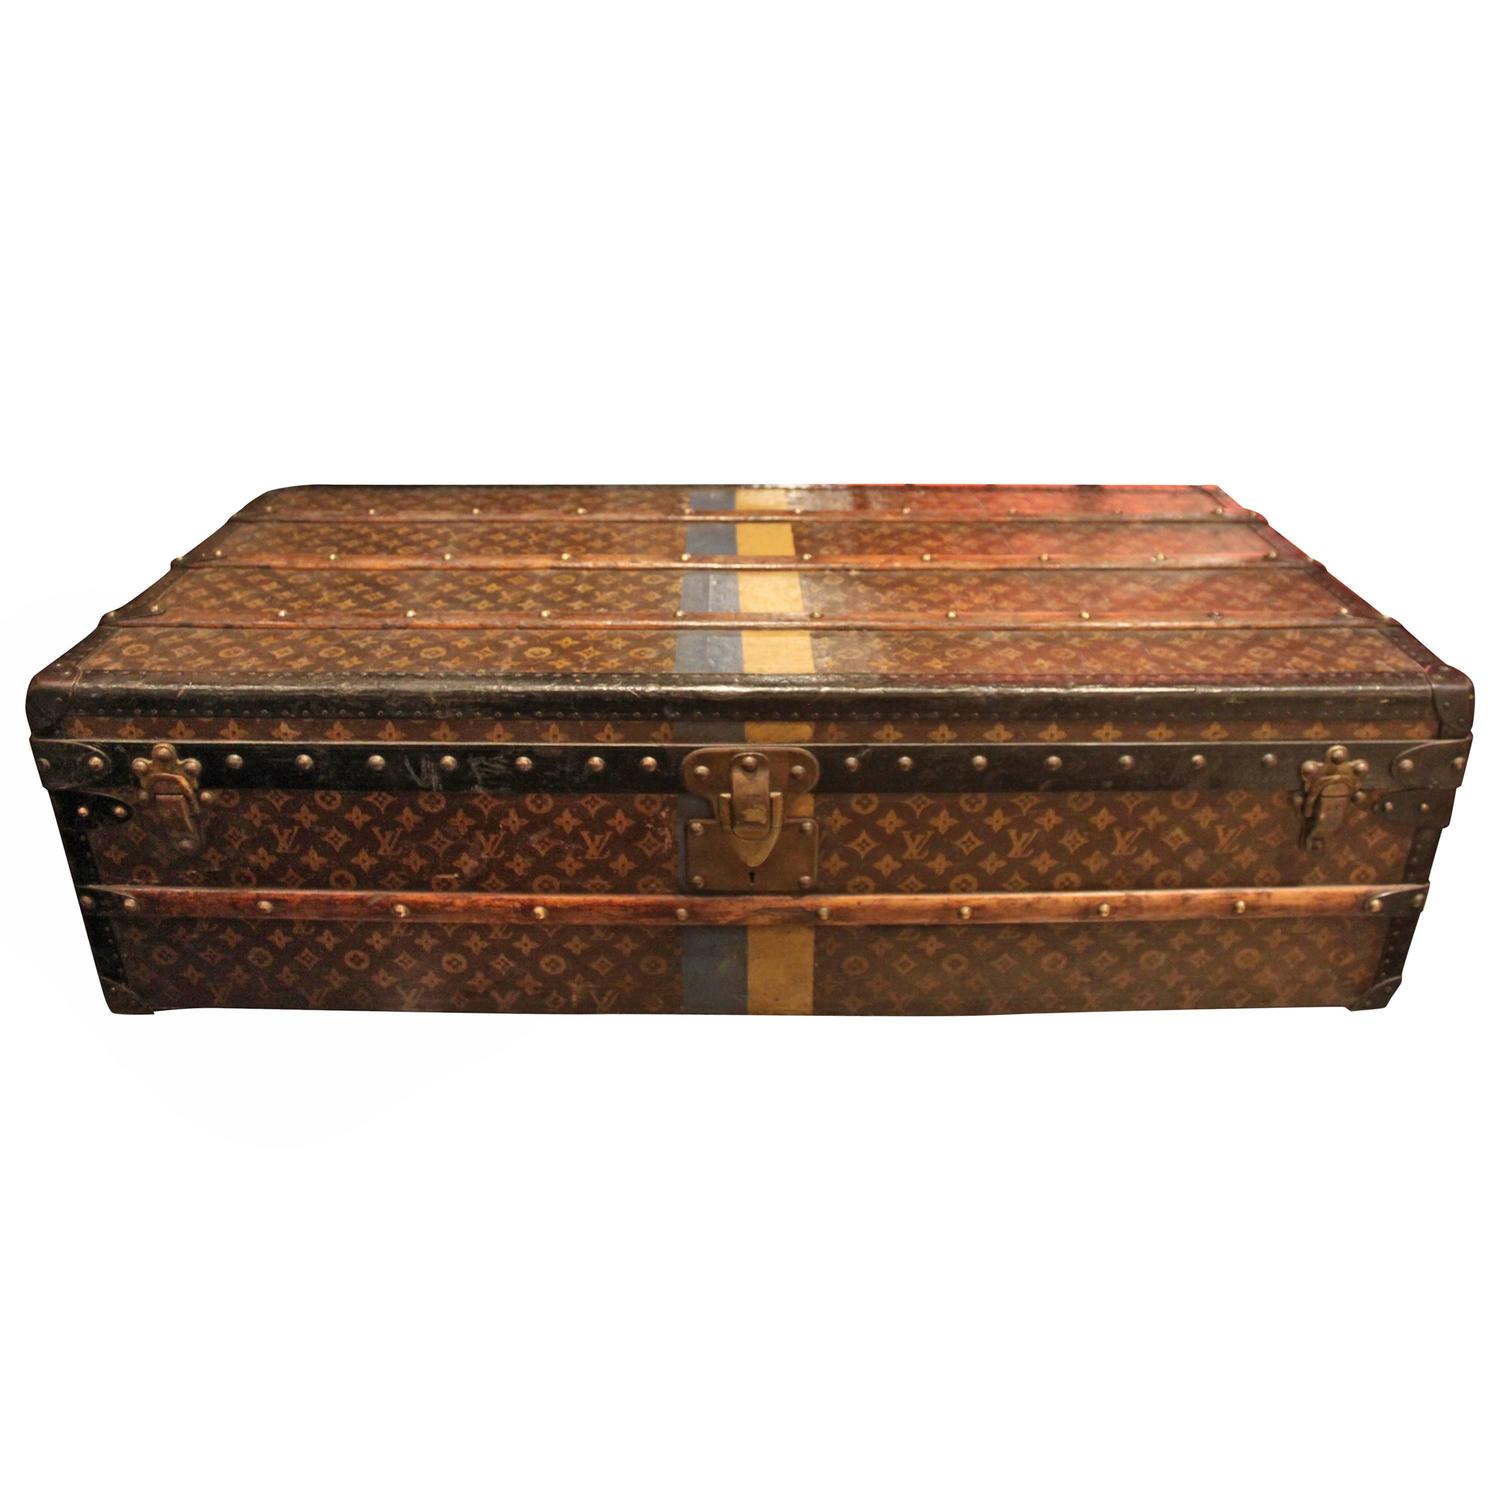 Vintage Louis Vuitton Steamer Trunk For Sale at 1stdibs